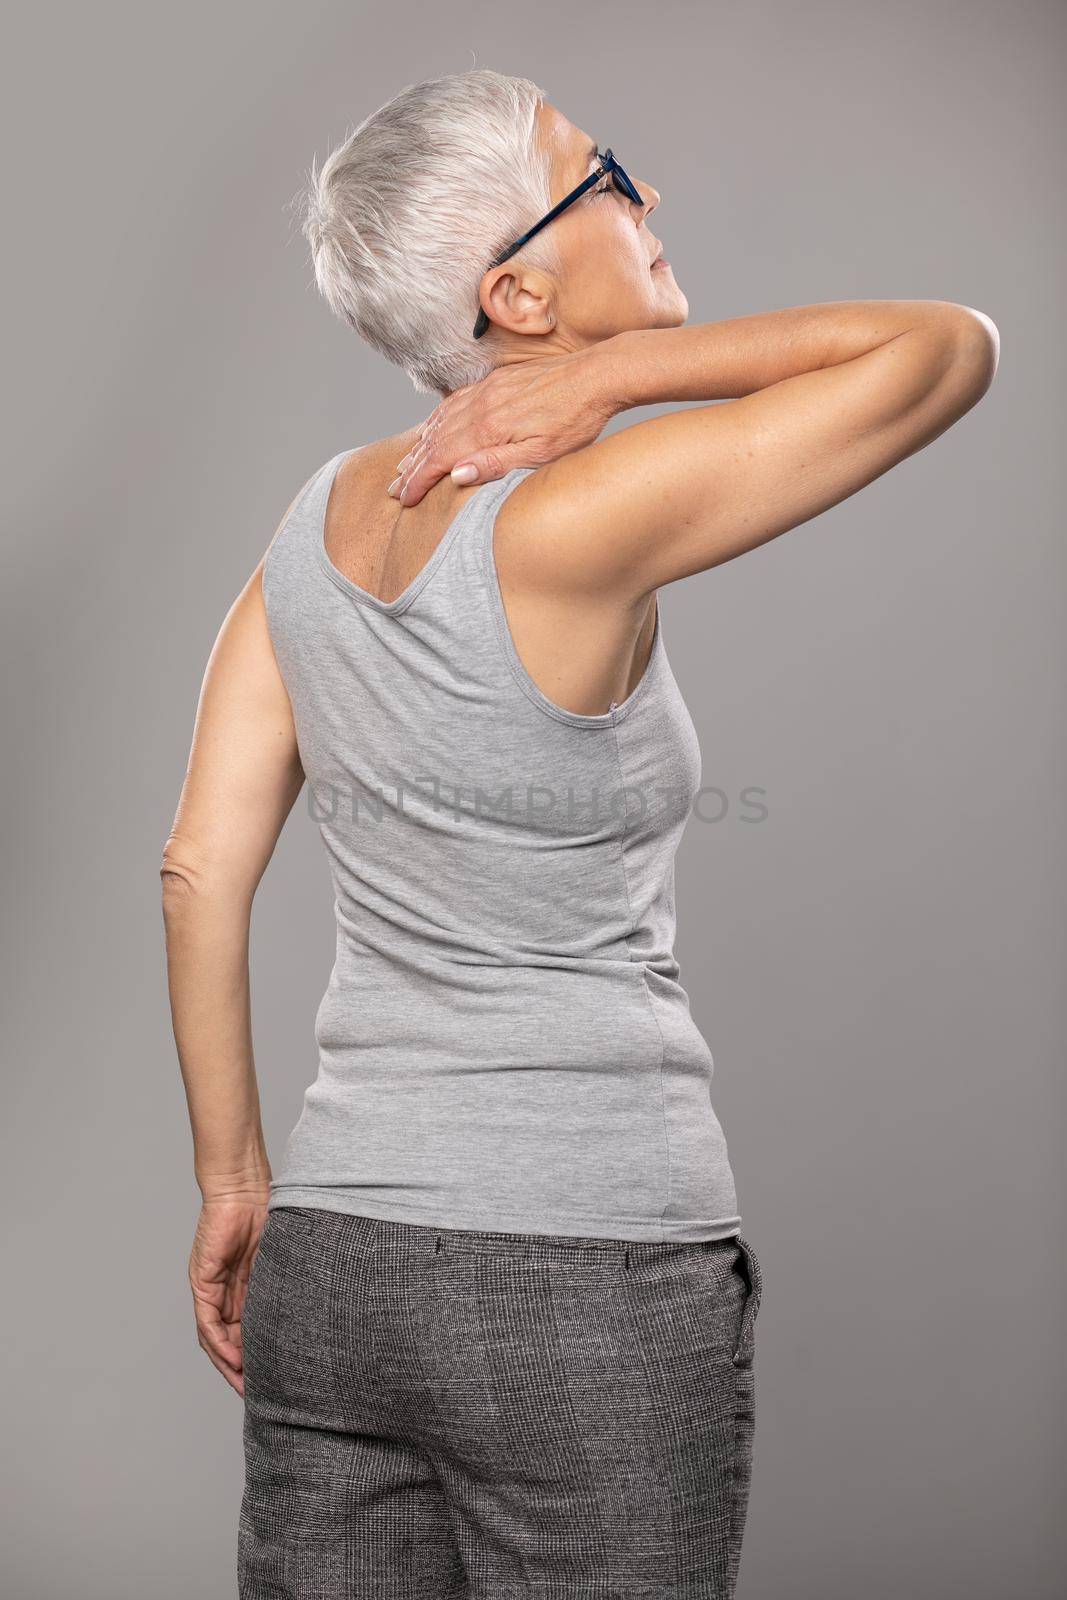 Backache pain in back, senior woman with  body and muscle problems by adamr